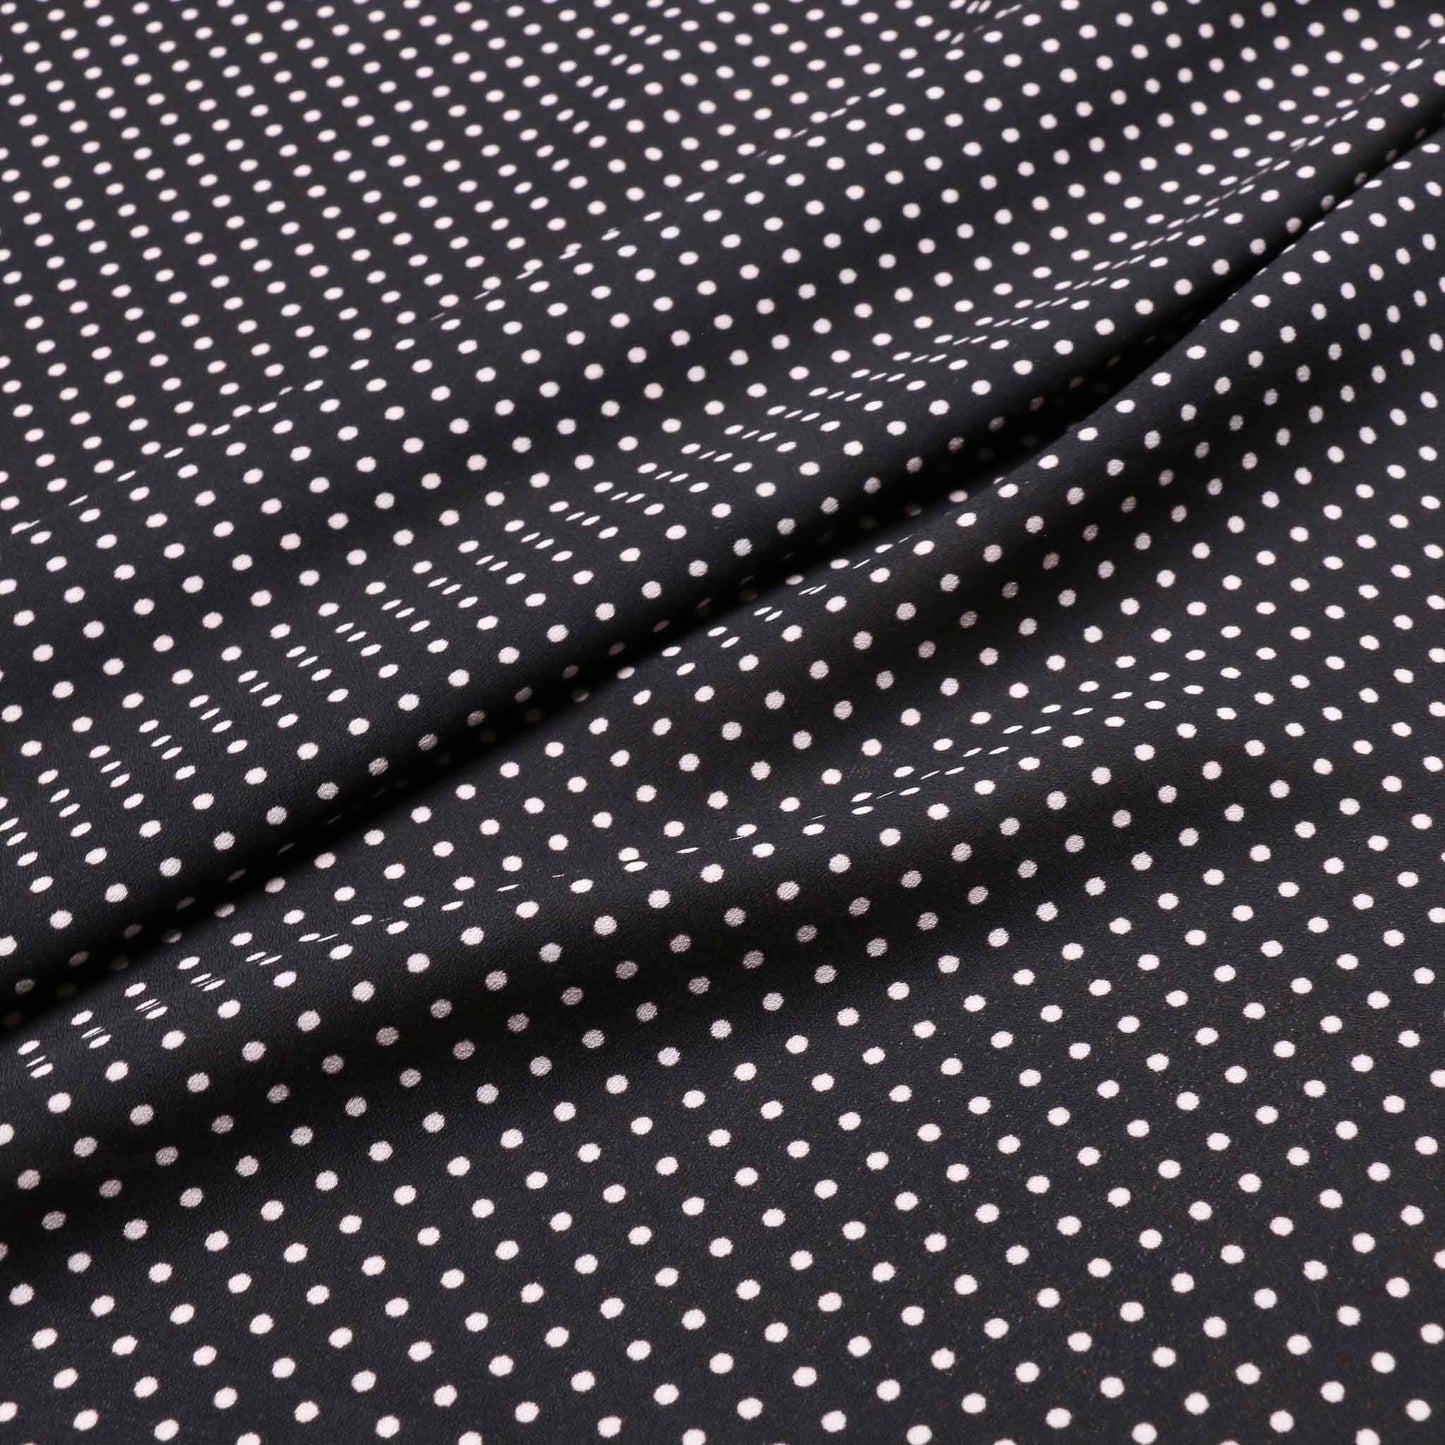 georgette dressmaking fabric with black and white polka dots print